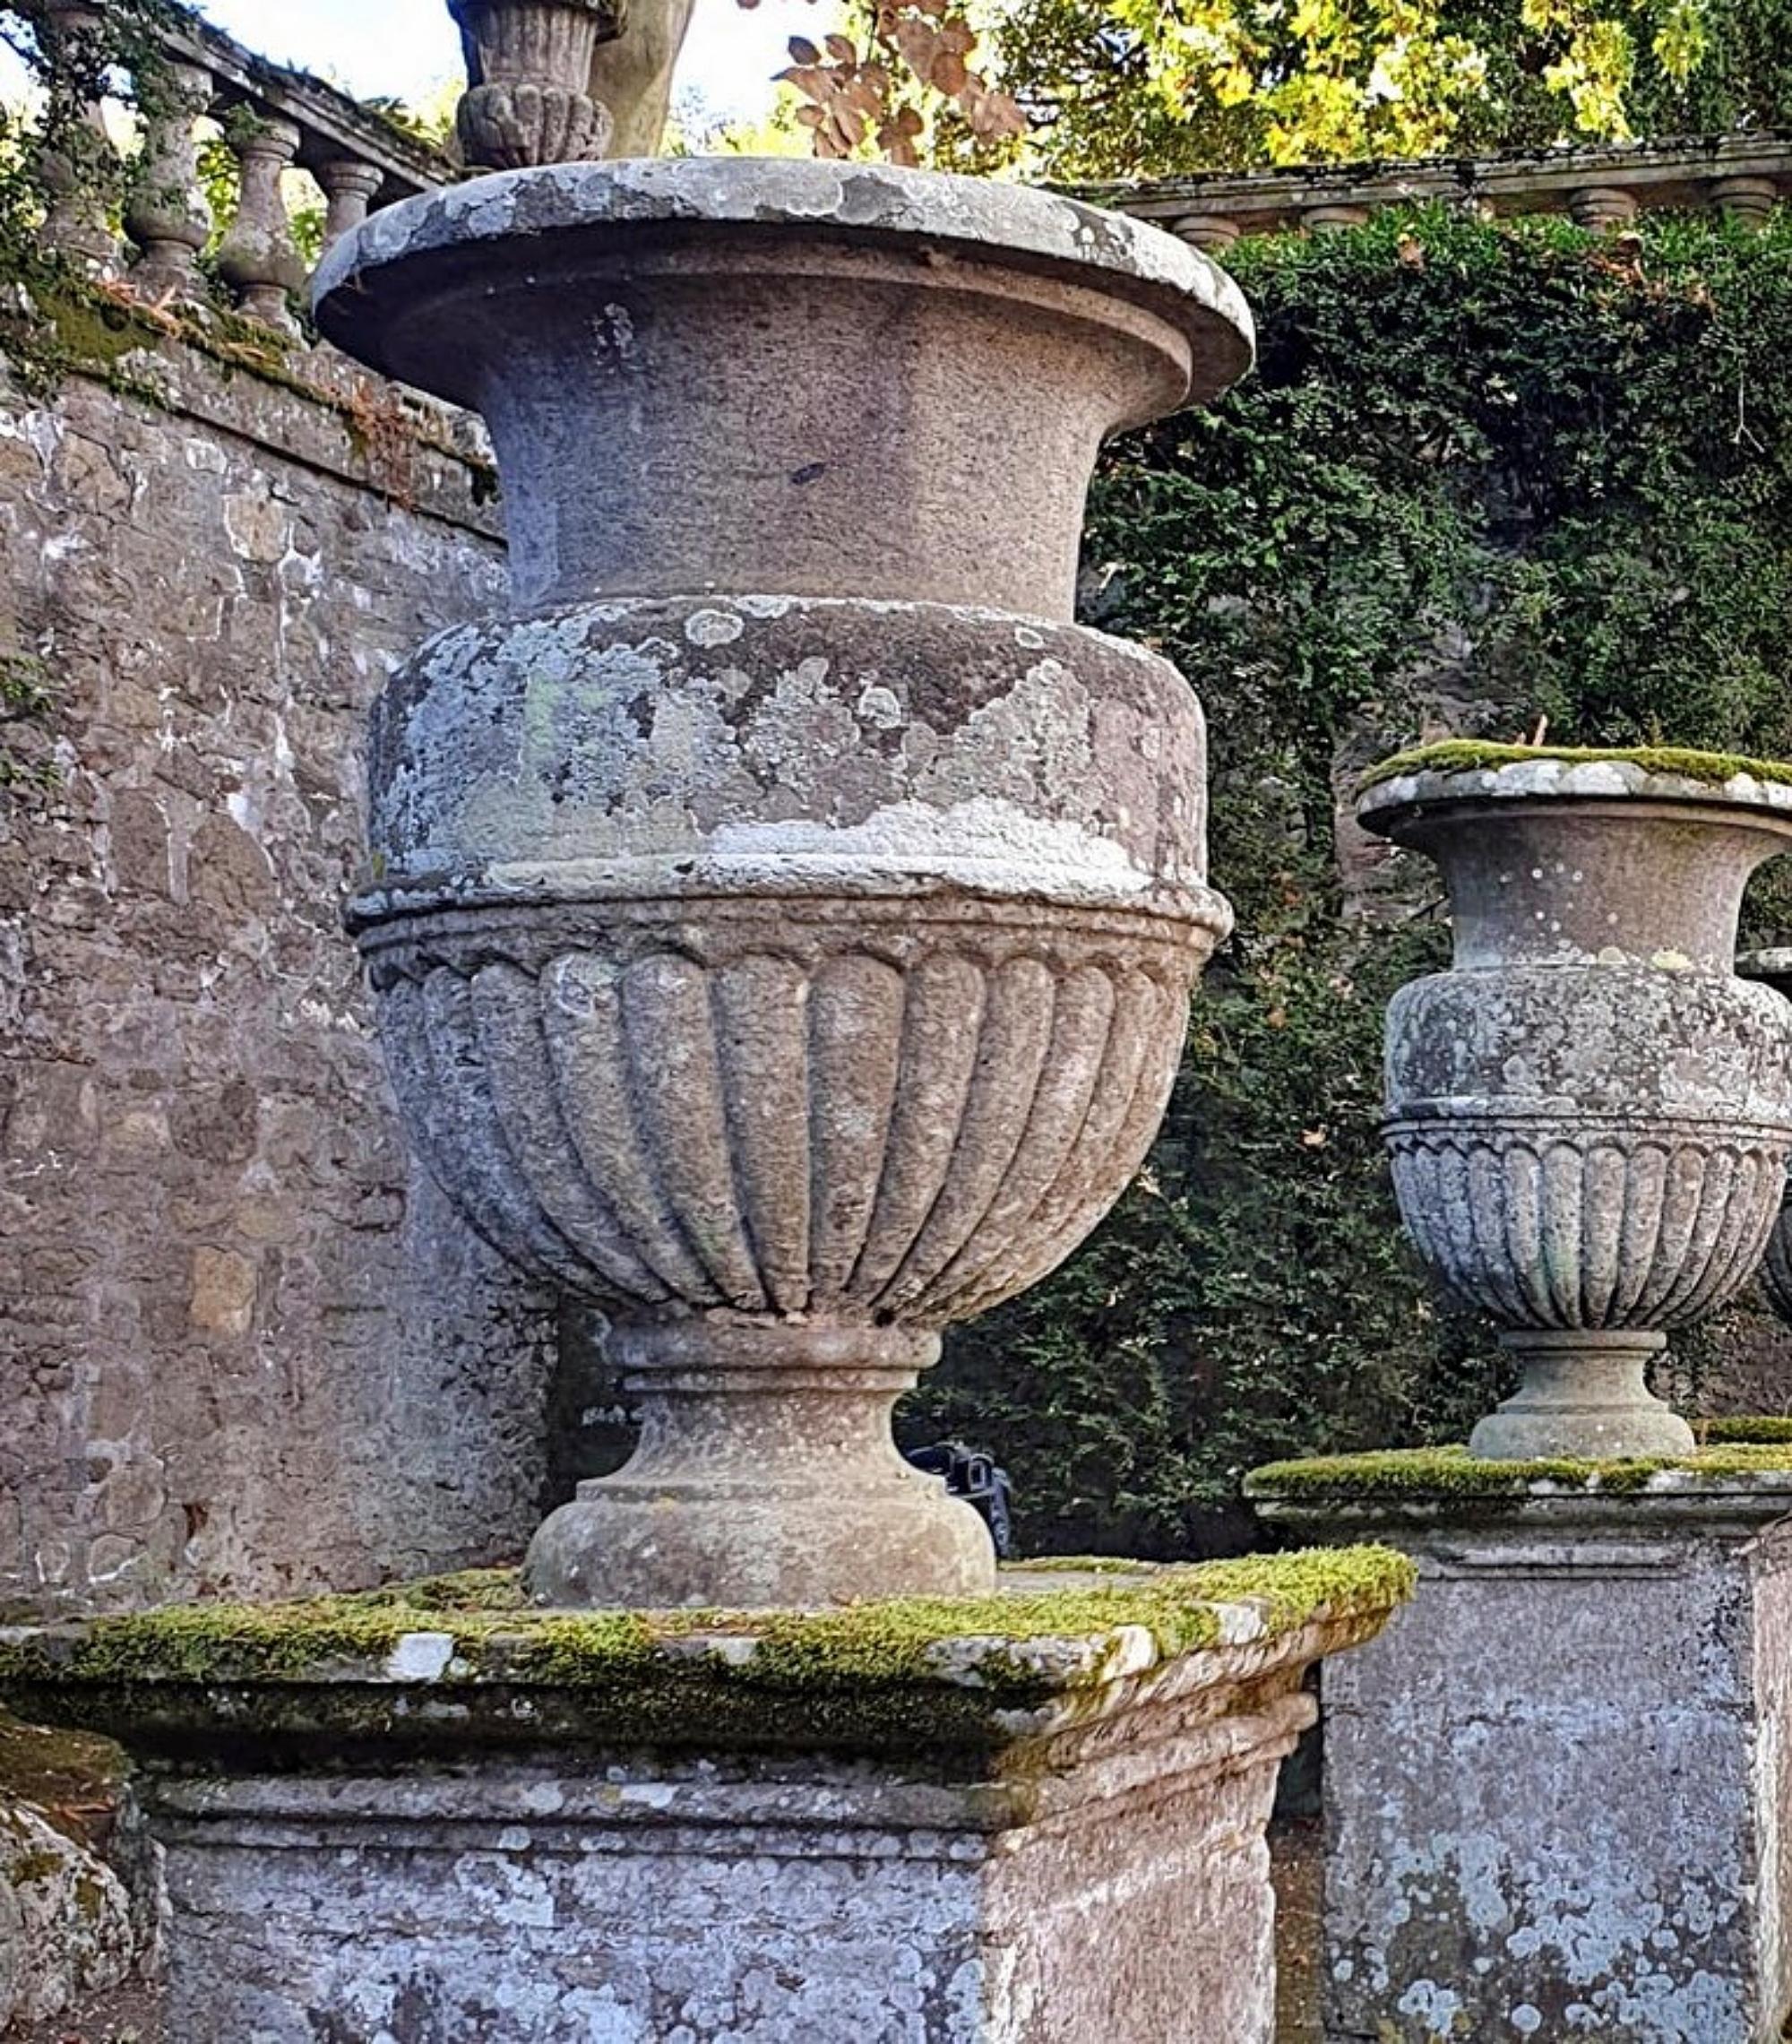 Pair stone vases of Villa Lante Della Rovere early 20th century
Italy
The Villa has one of the most beautiful Renaissance parks in Italy. 
Vase with 26 vertical pods.

Height 71 cm
Diameter 50 cm
Weight 160 Kg
Where the original Villa Lante